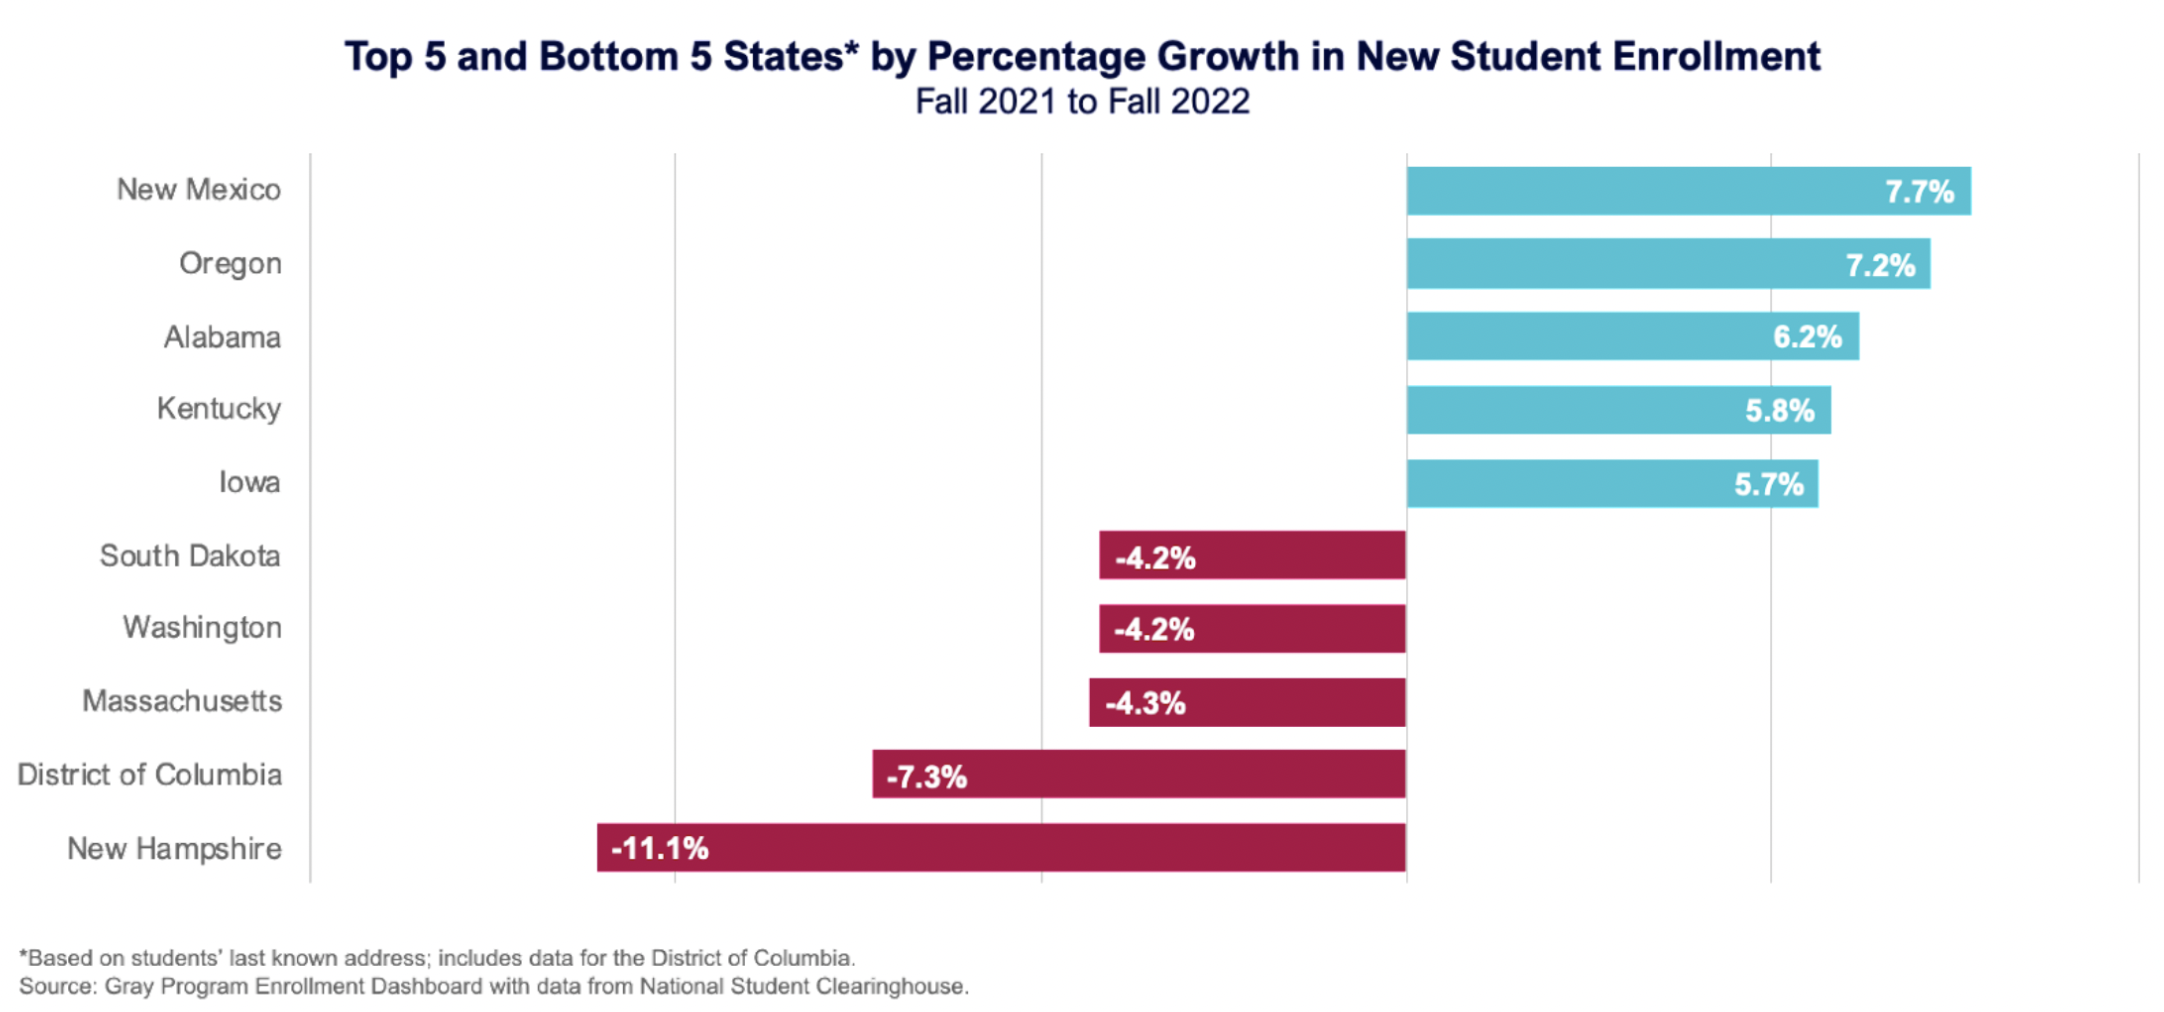 Top 5 and Bottom 5 States* by Percentage Growth in New Student Enrollment